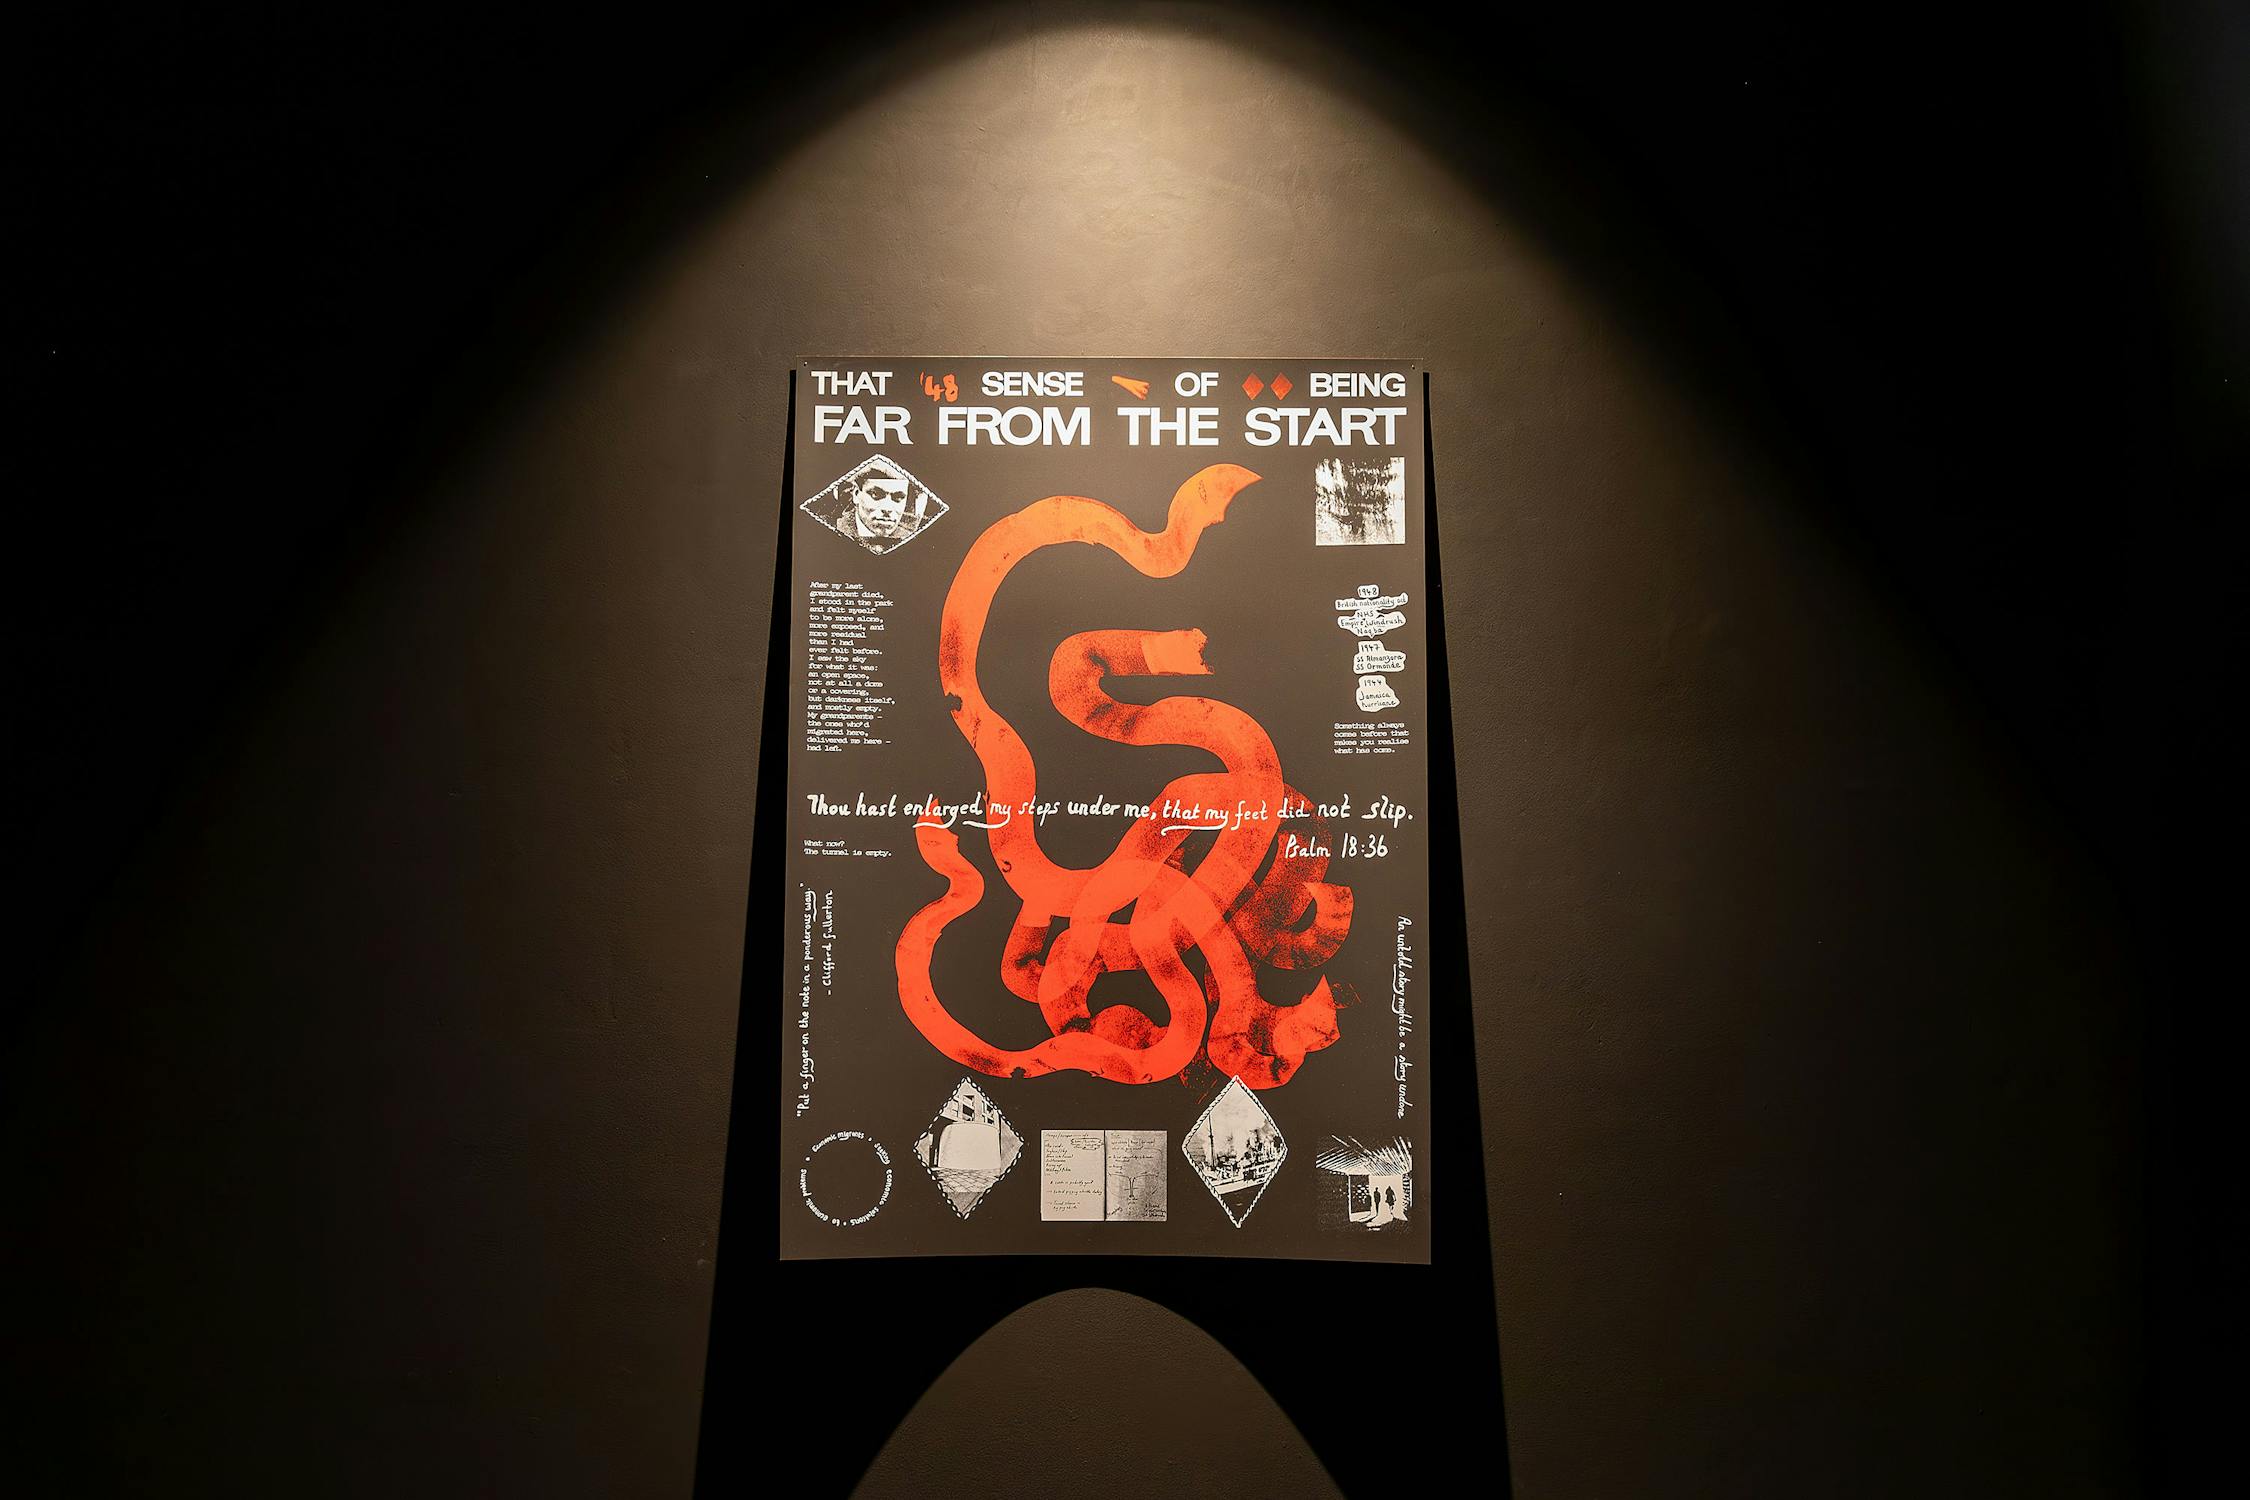 a photograph of a screenpainted poster against mounted on a black wall. The poster is downlit and shadowy. The poster has a swirling red line in the centre, and smaller screenpainted images in white around the edge.